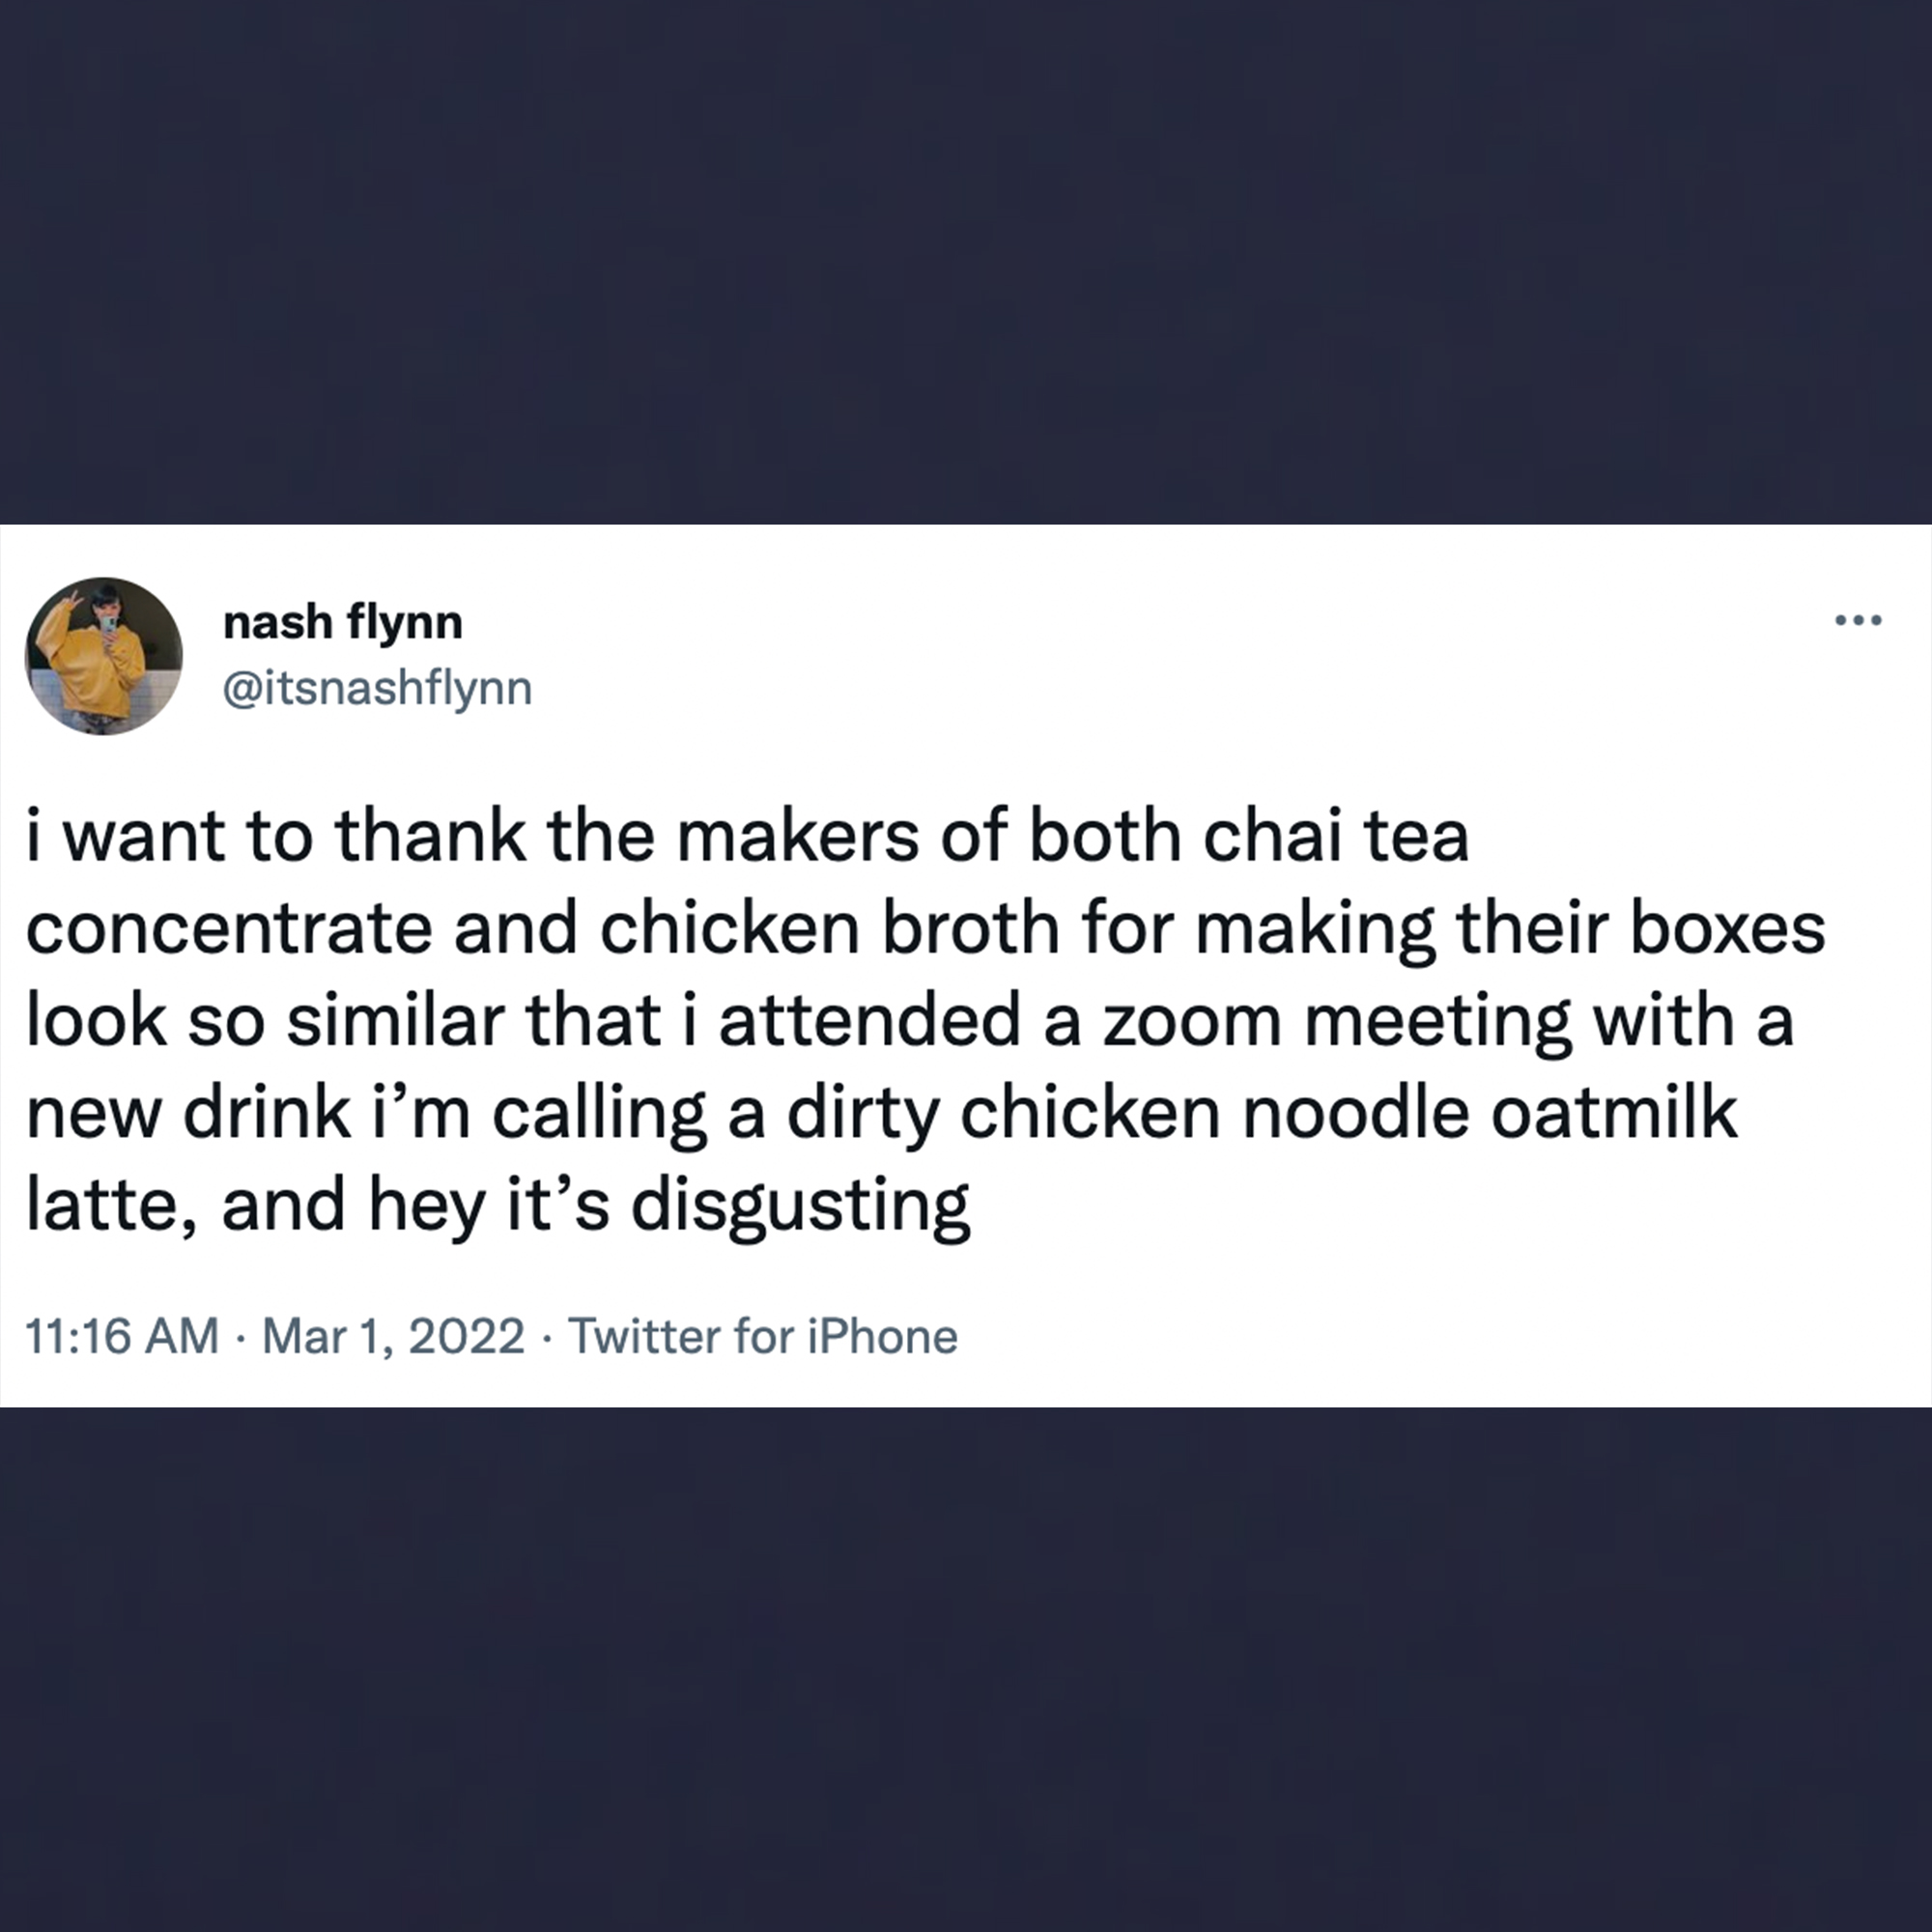 funny tweets - material - Be nash flynn i want to thank the makers of both chai tea concentrate and chicken broth for making their boxes look so similar that i attended a zoom meeting with a new drink i'm calling a dirty chicken noodle oatmilk latte, and 